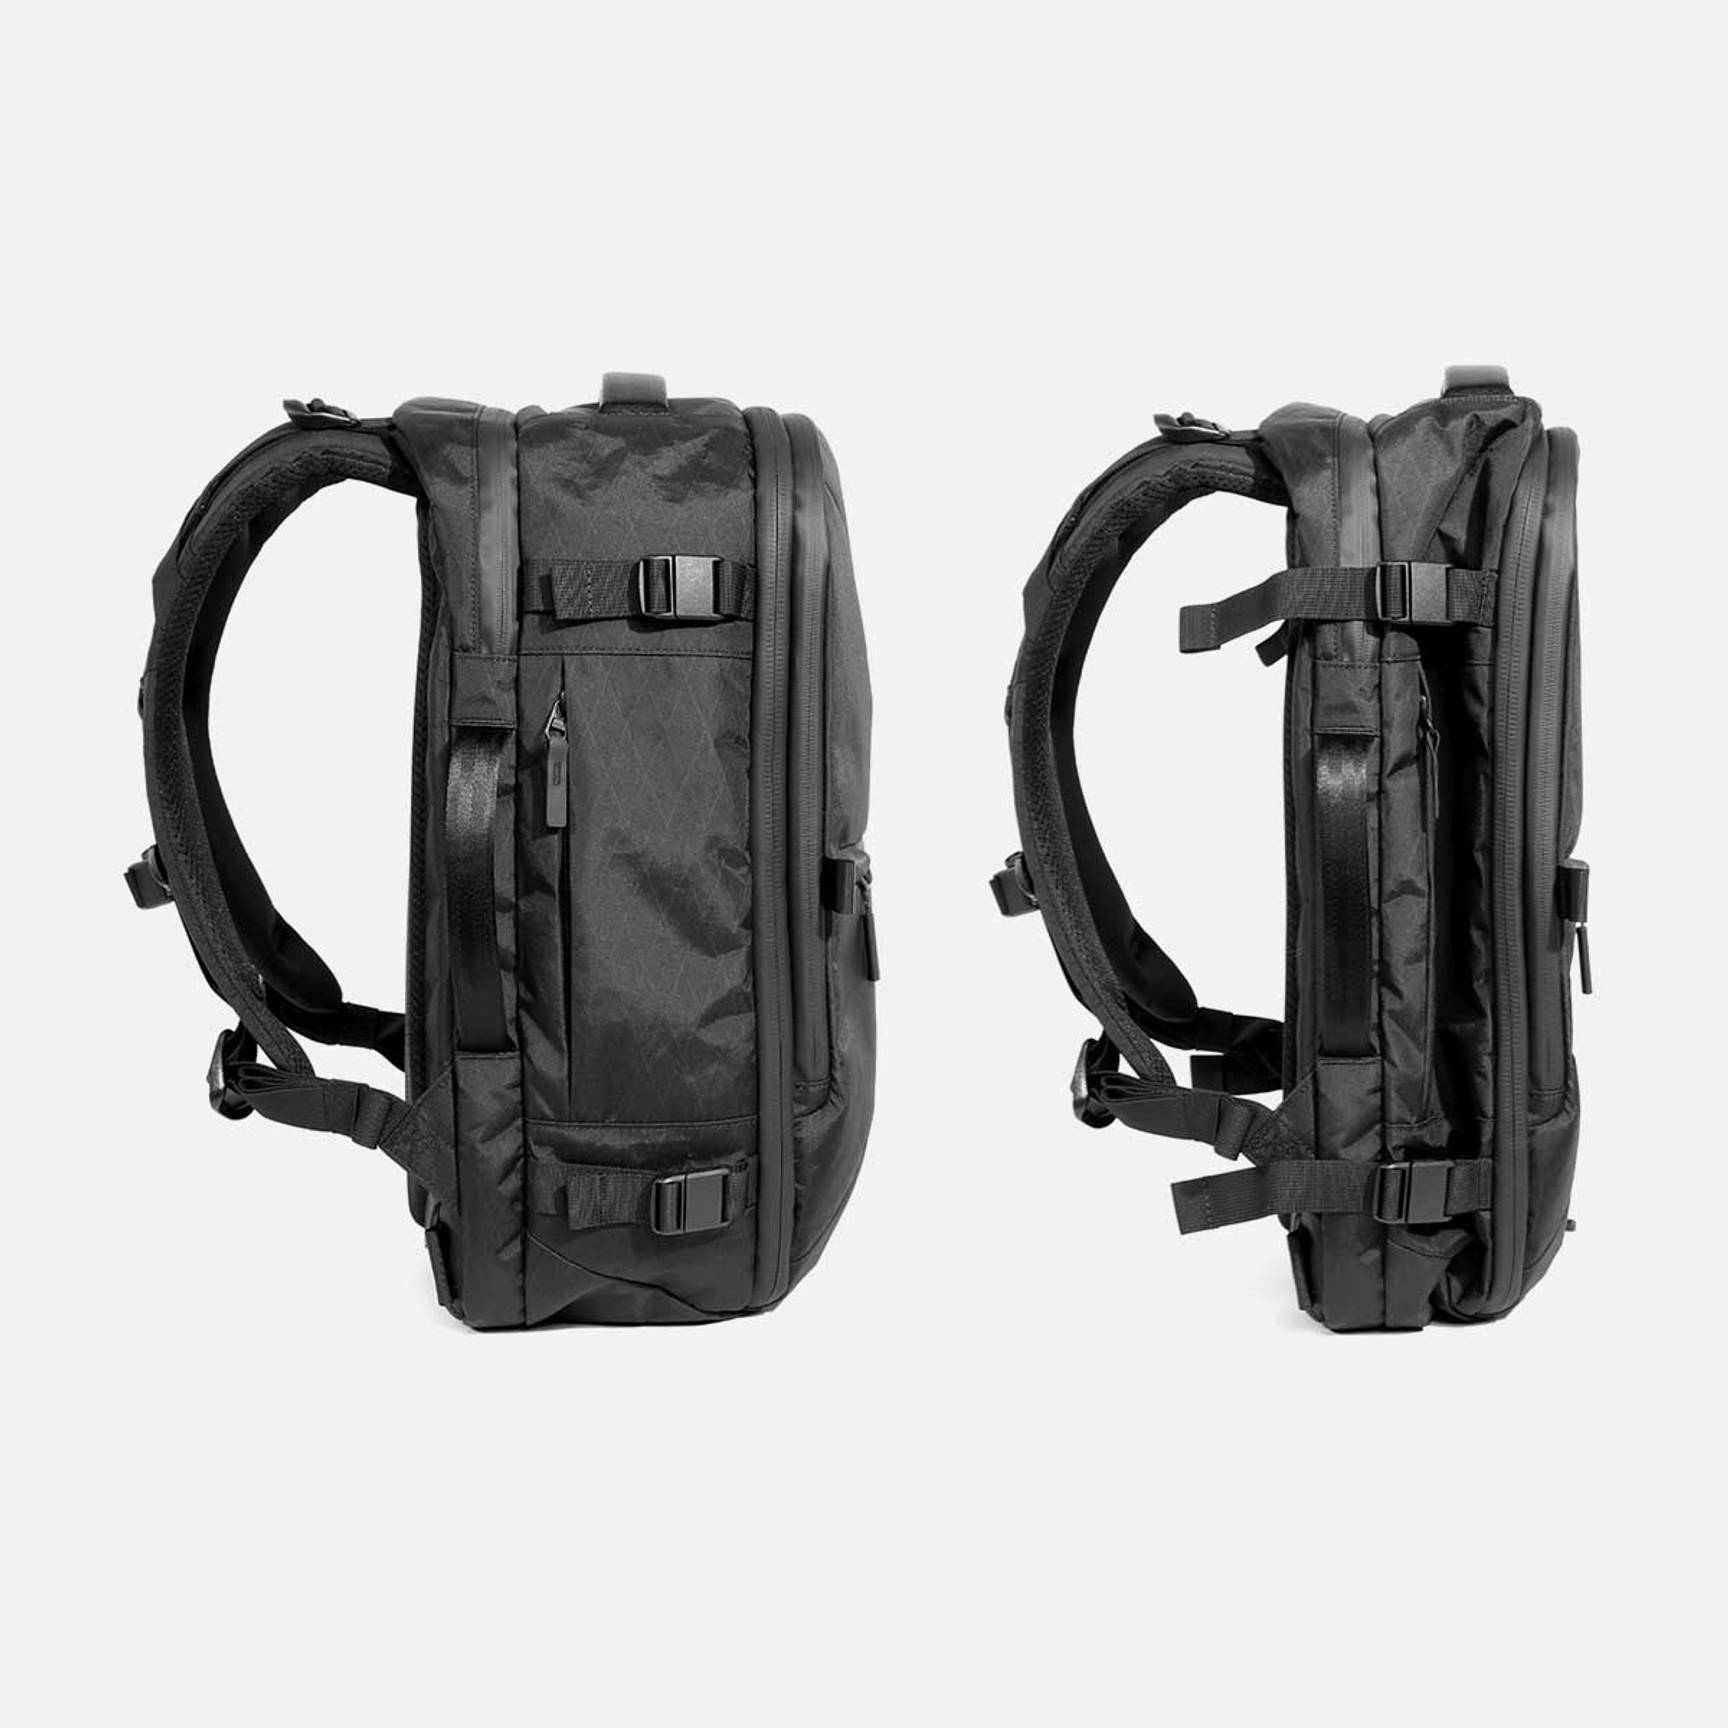 Aer Travel Pack 3 Small Backpack in Black